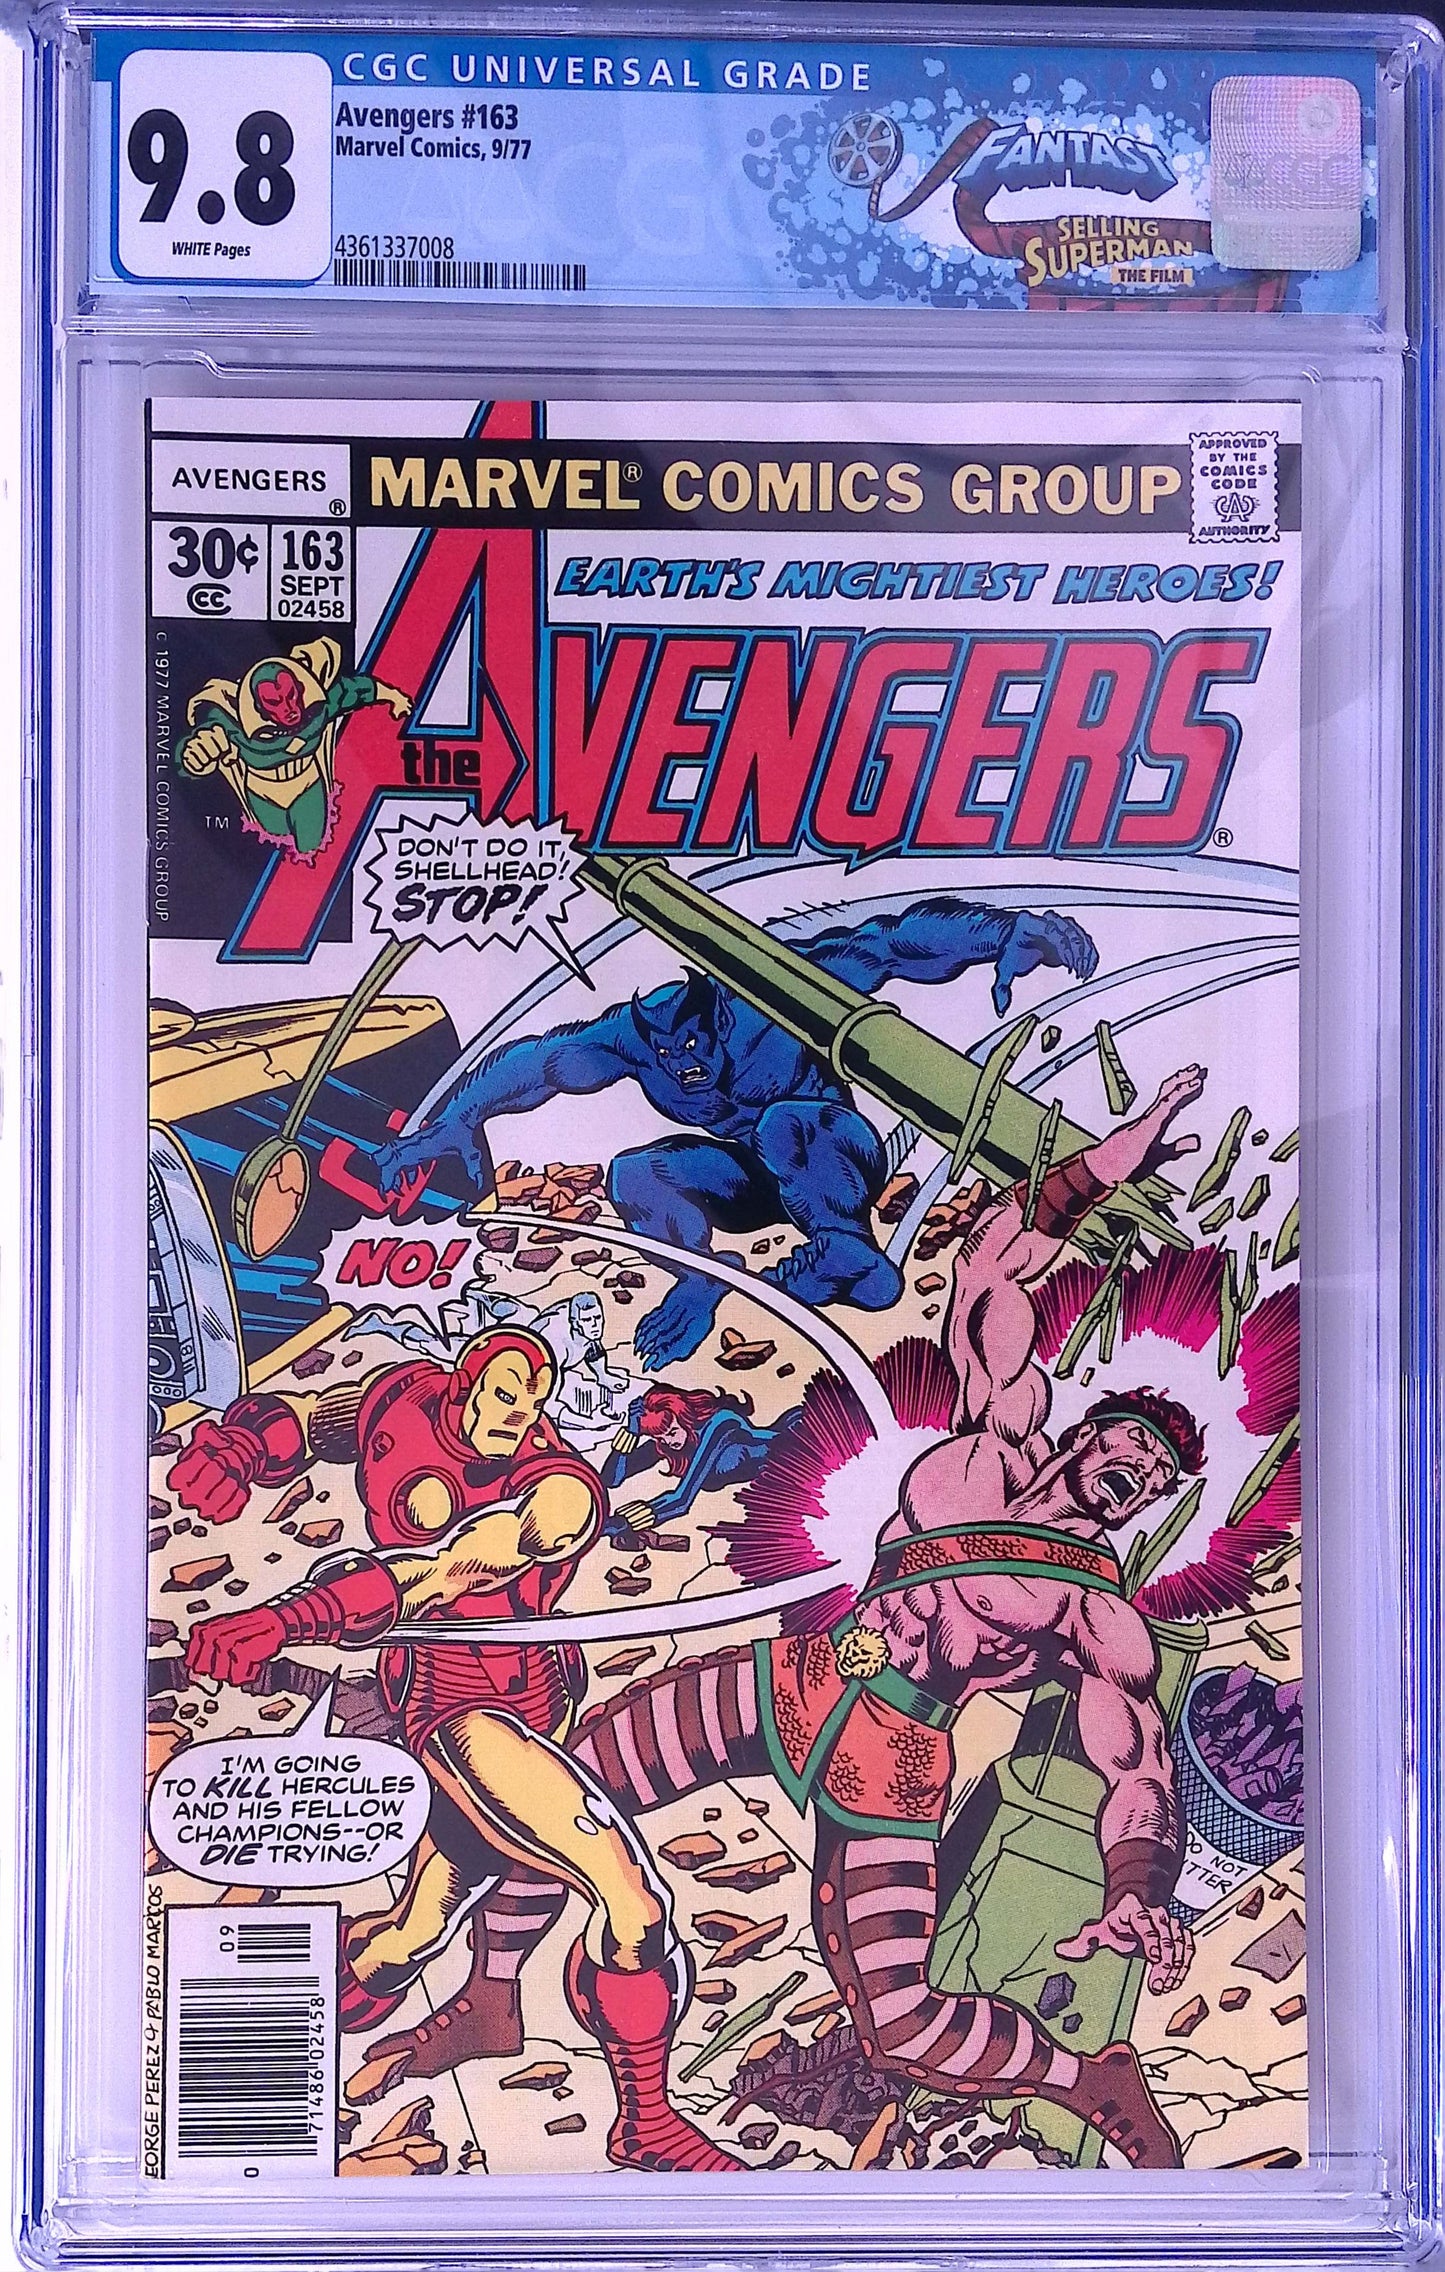 Marvel Avengers 163 9/77 FANTAST CGC 9.8 White Pages